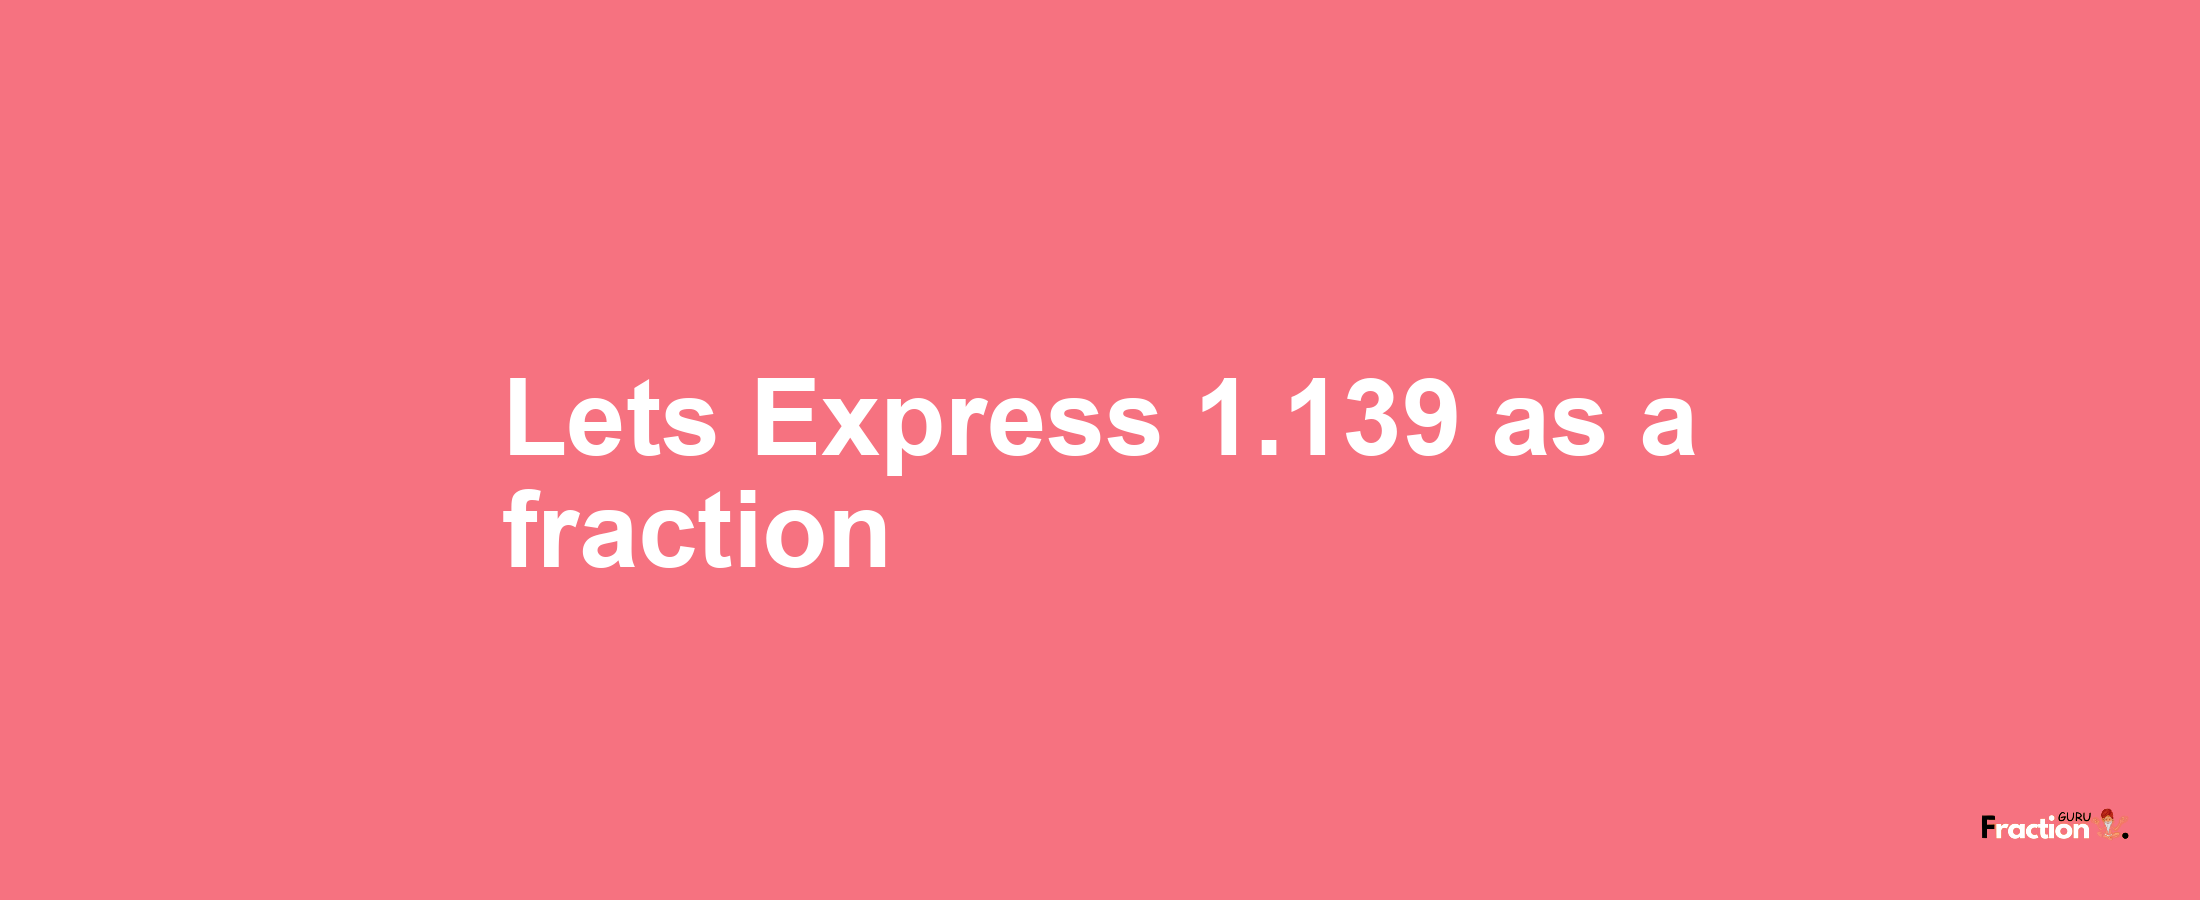 Lets Express 1.139 as afraction